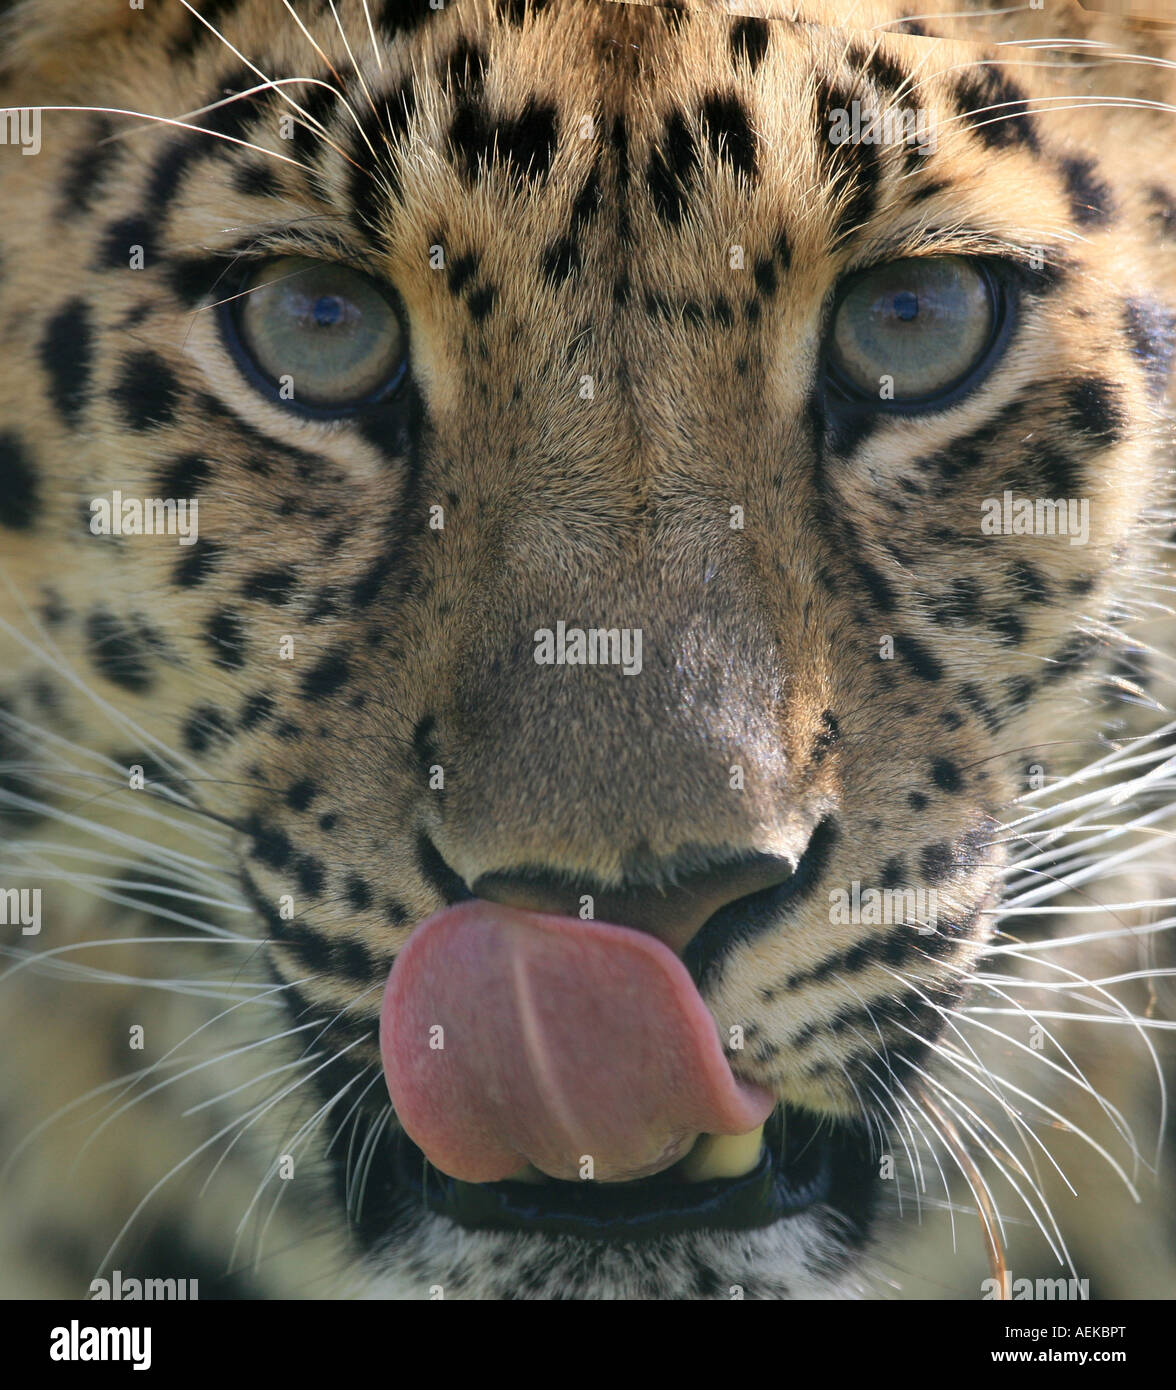 Amur Leopard, face on, licking its lips Stock Photo